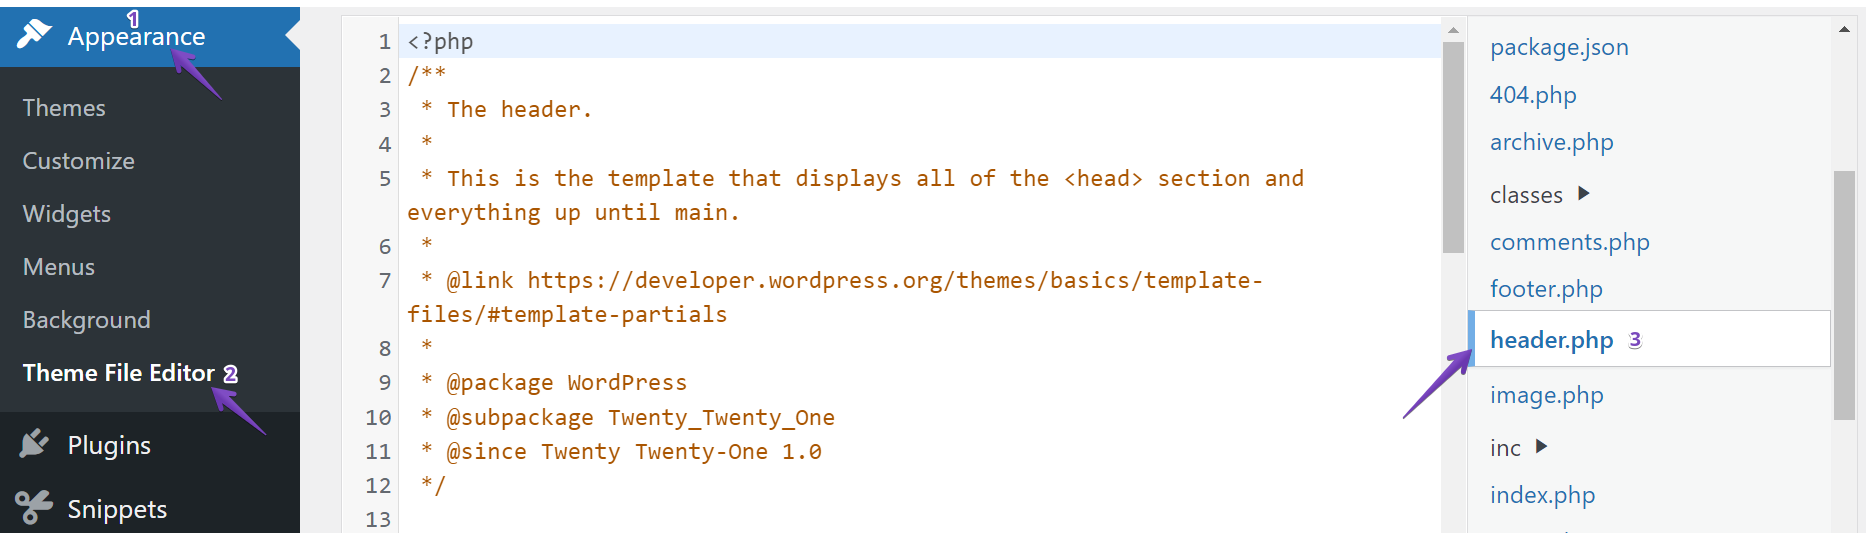 click header.php from Theme File Editor